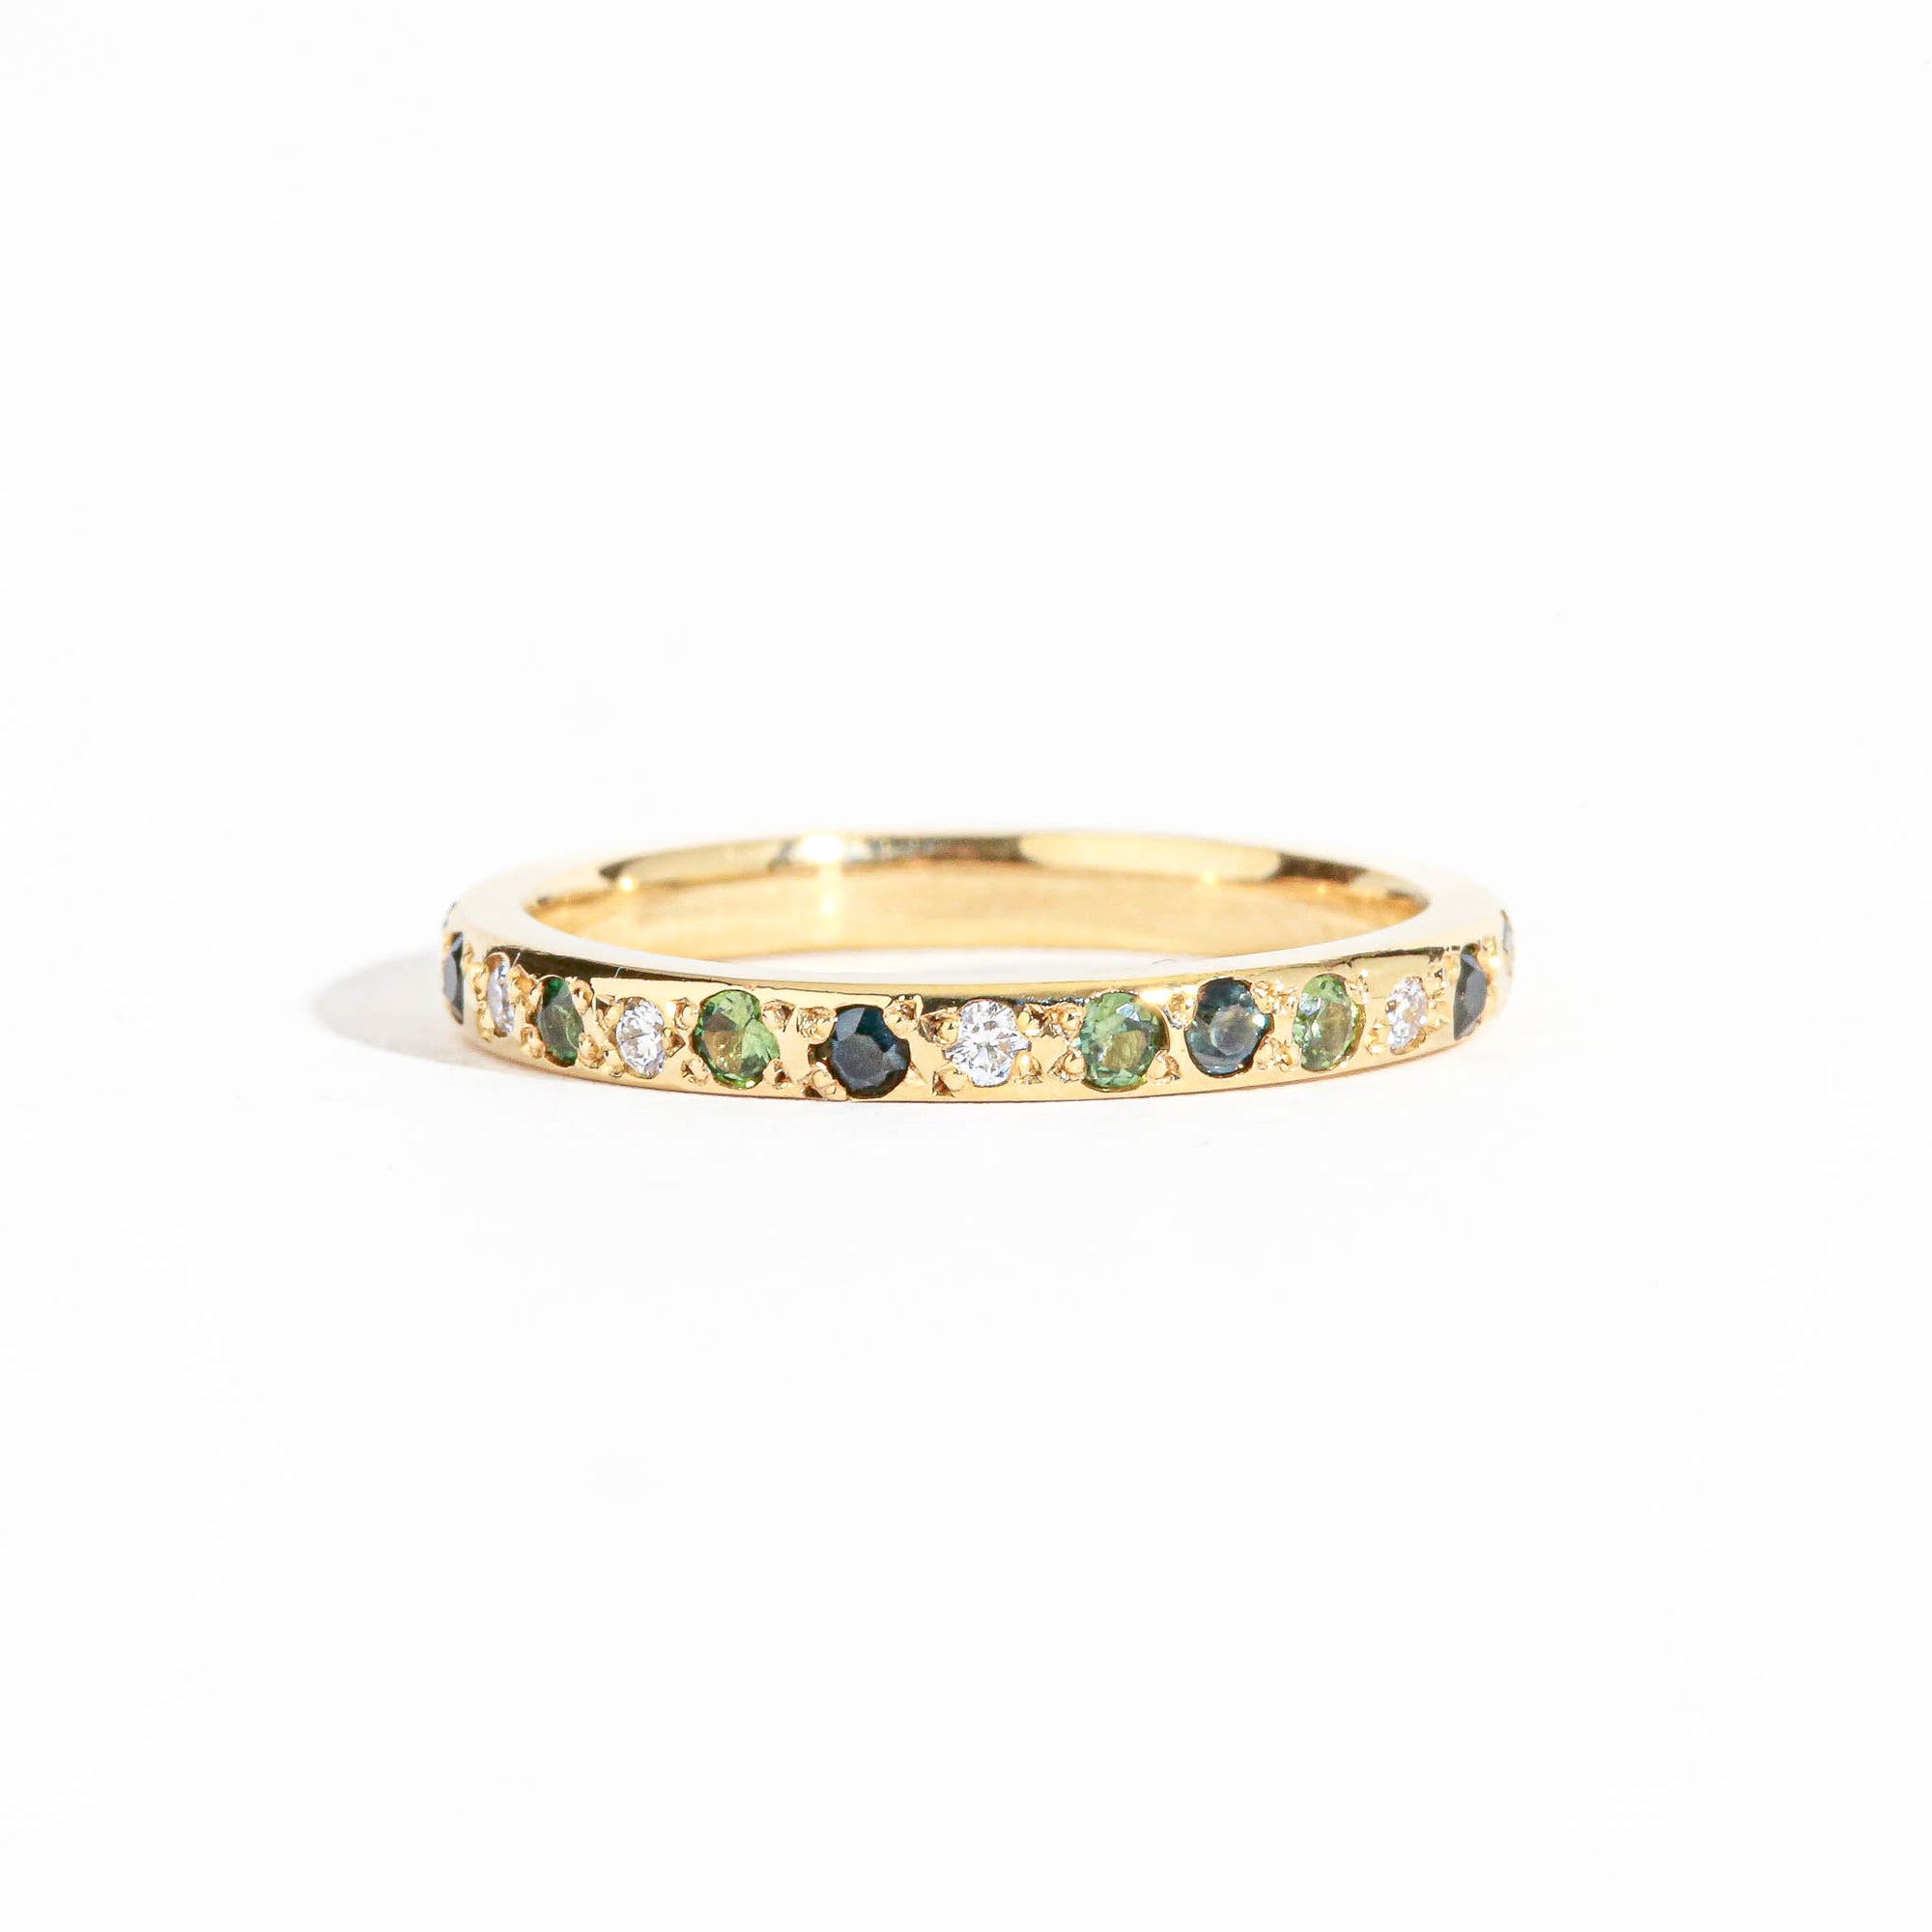 Bespoke Australian sapphire and diamond wedding band in 18ct yellow gold, made in Melbourne.